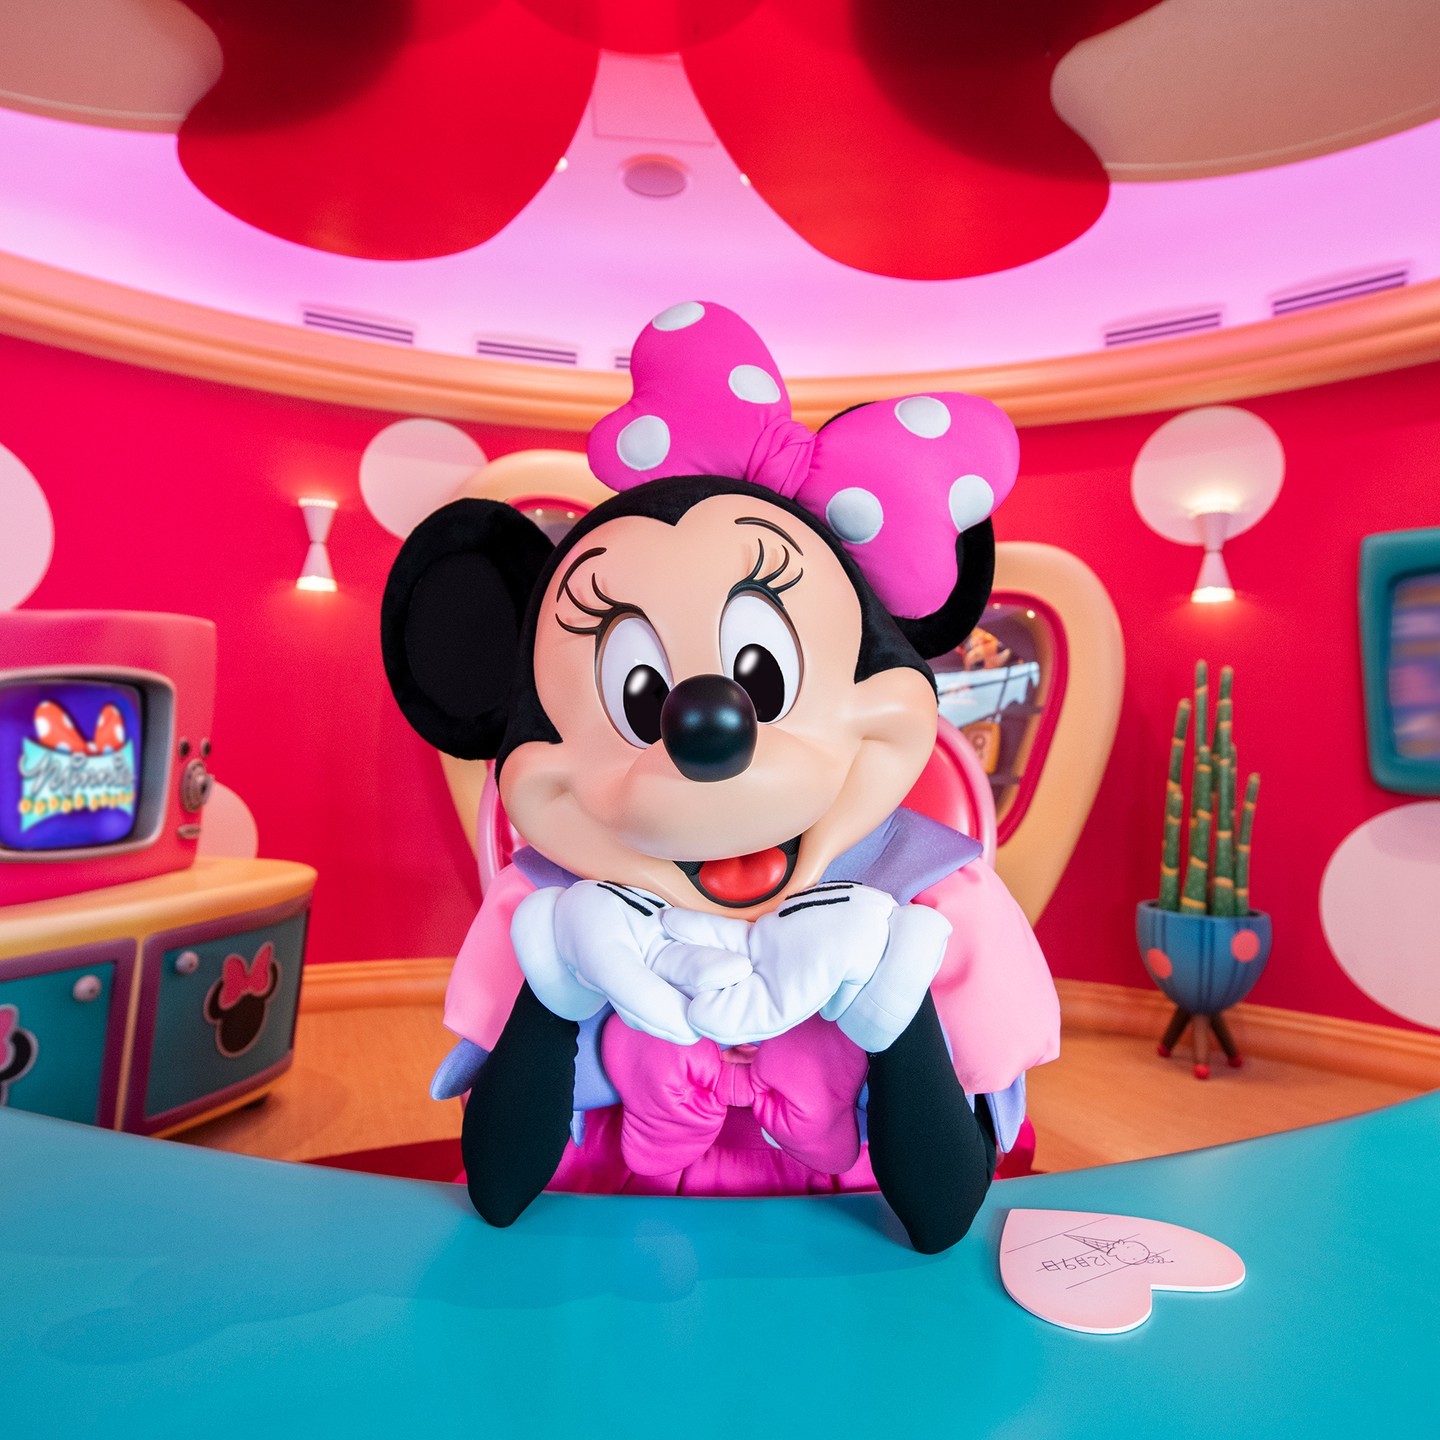 image of Minnie is always ready for her closeup!
そんなに見つめられると照れちゃうね❤️
#minniemouse...